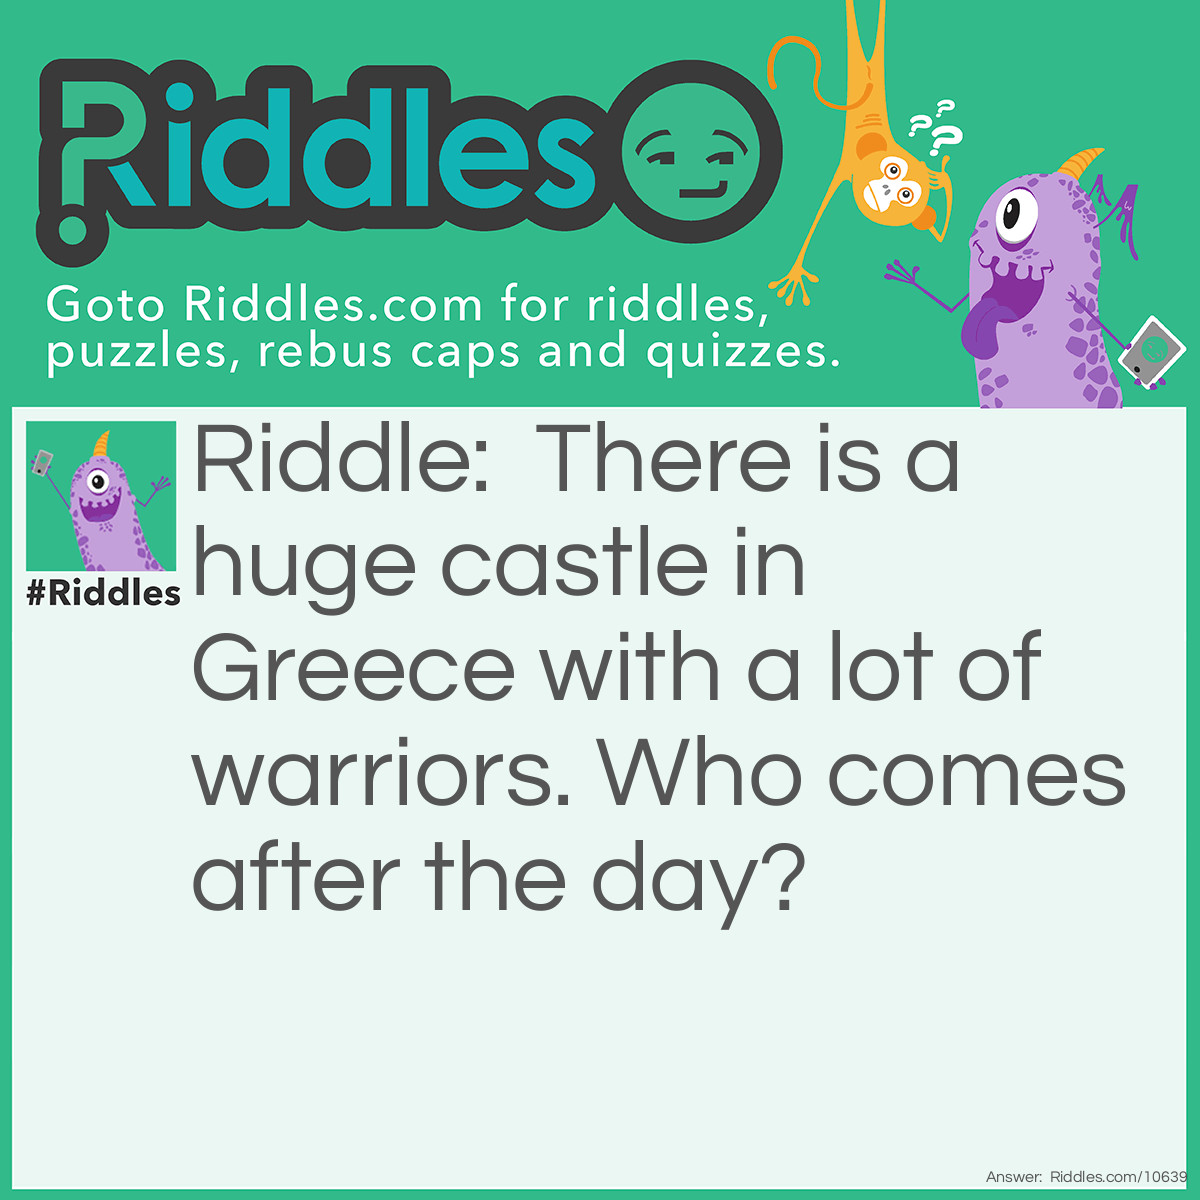 Riddle: There is a huge castle in Greece with a lot of warriors. Who comes after the day? Answer: The knight! Compare knight with night. Same pronunciation,right?